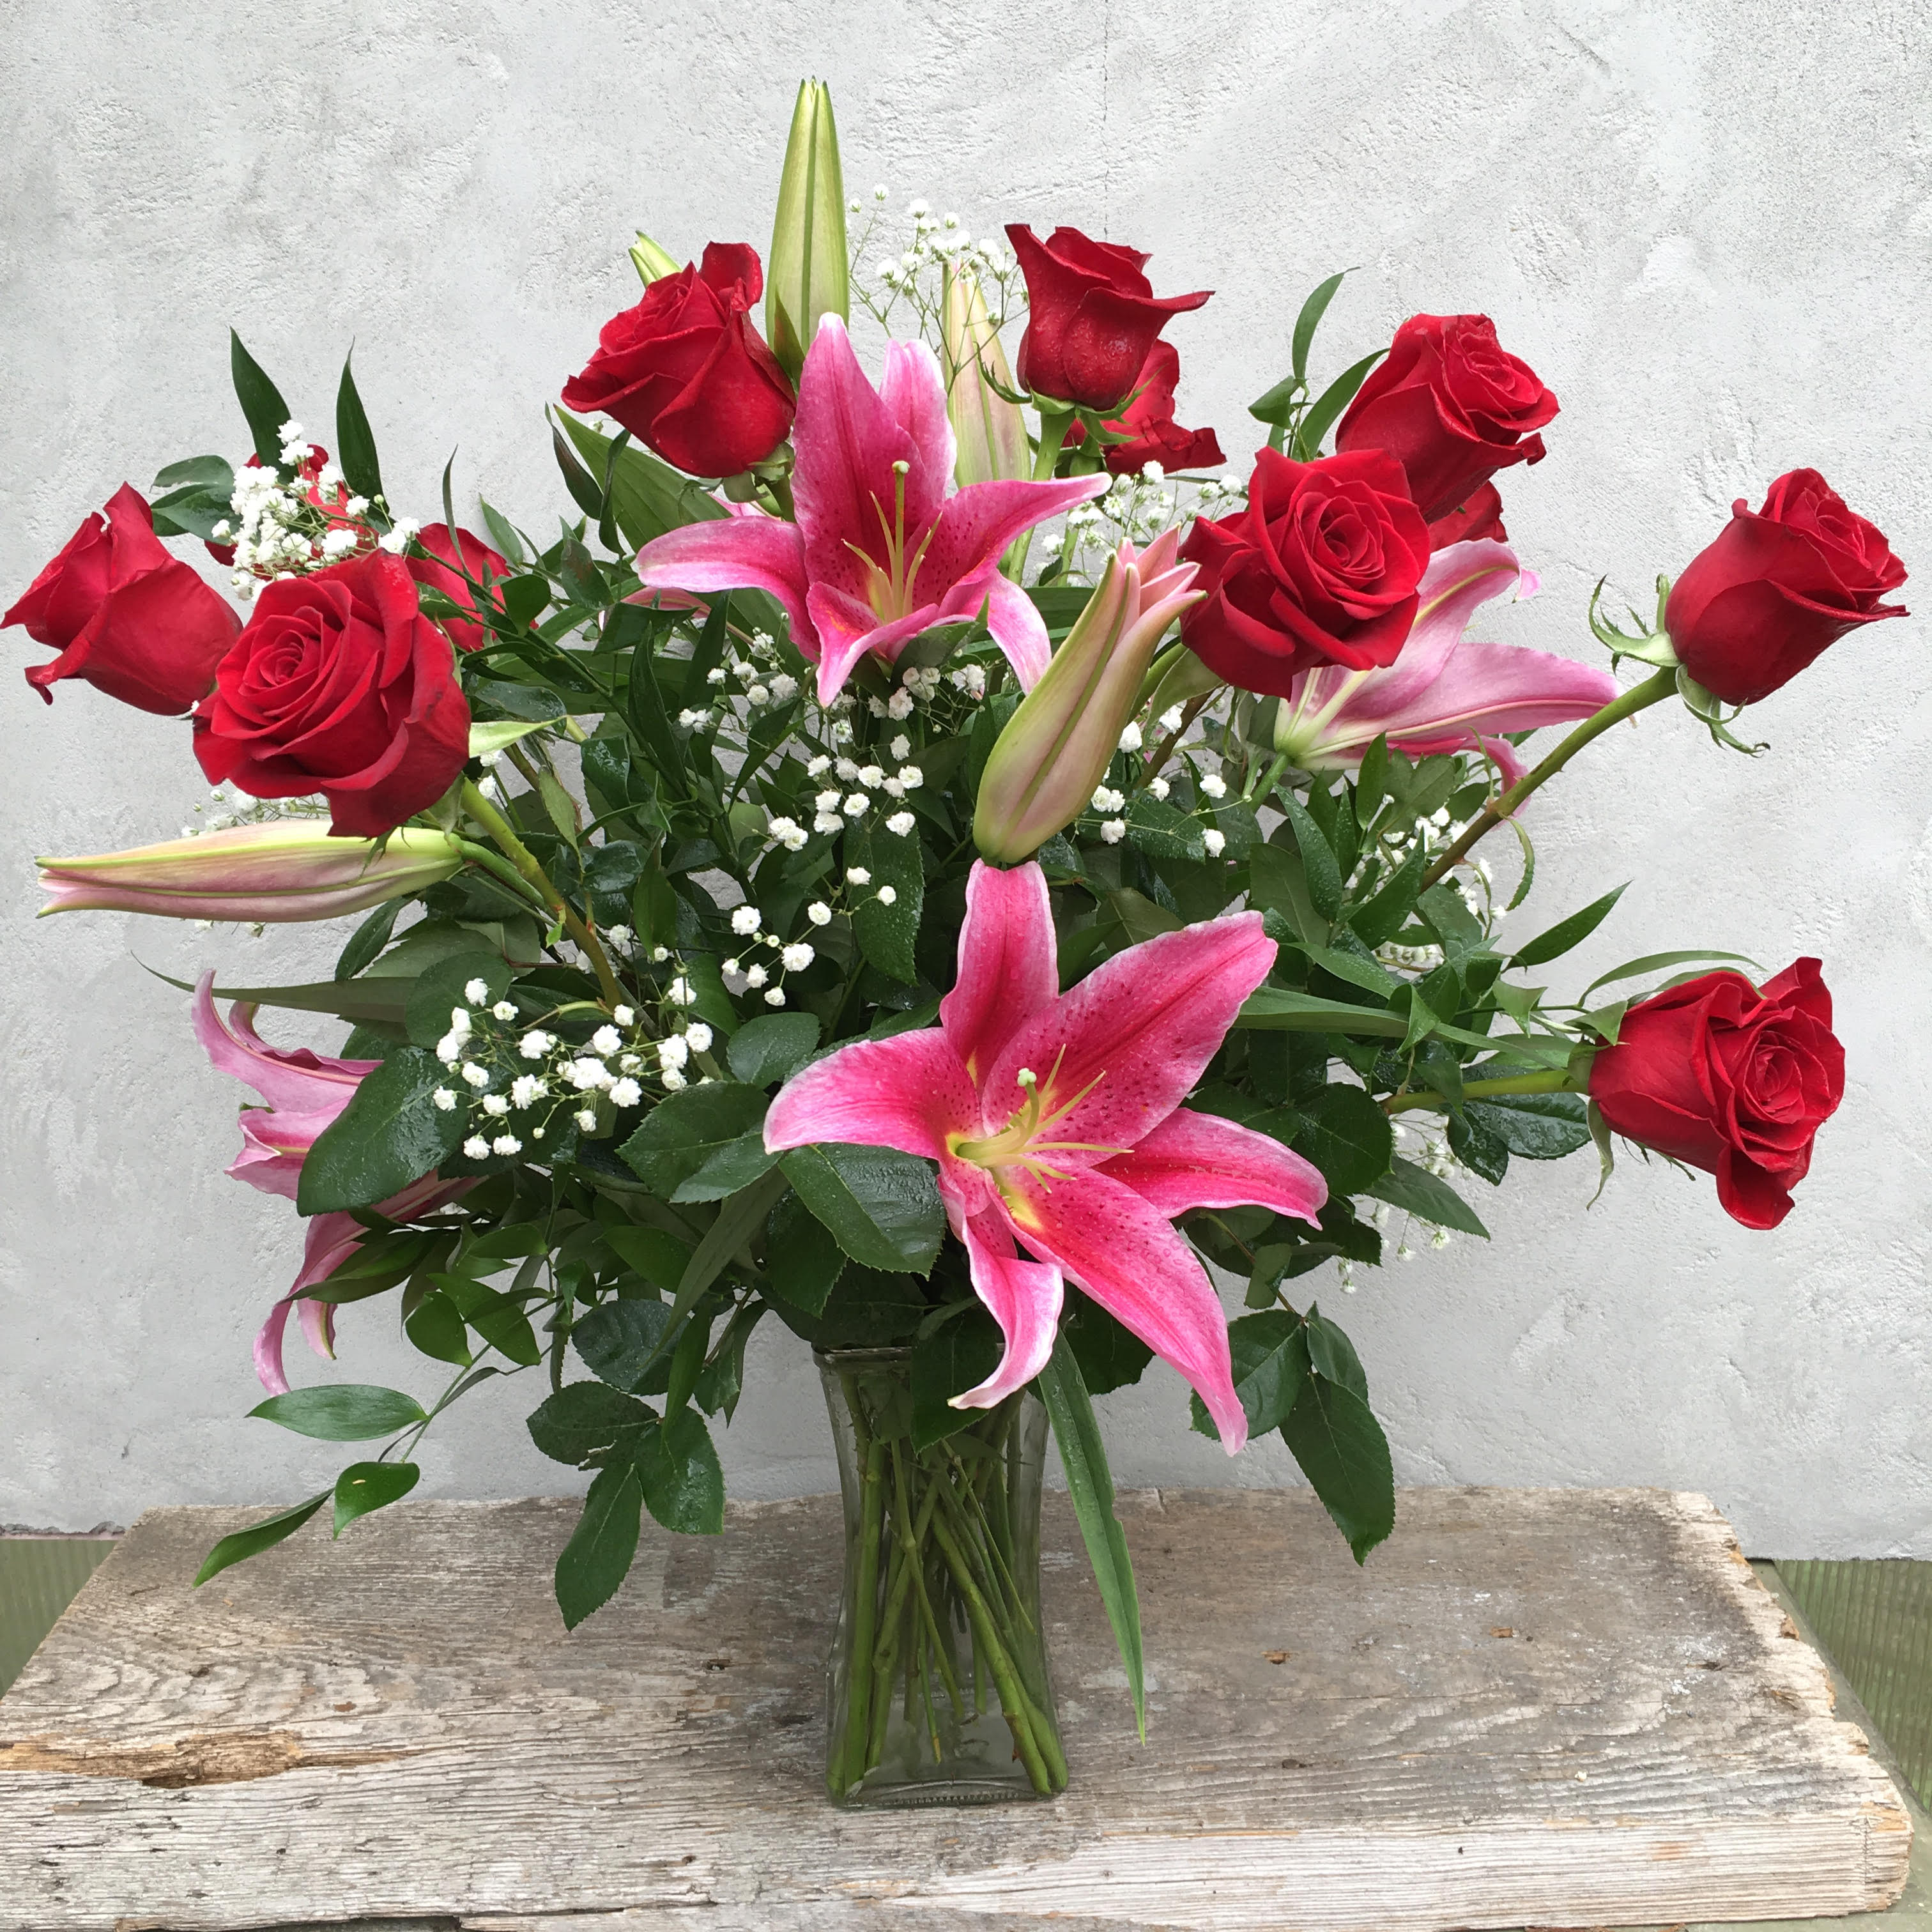 12 Premium Red Roses with 3 Lillies - 12 Premium red roses with greenery and stems of luxurious lilies and wax flower. *Substitutions may be applied*